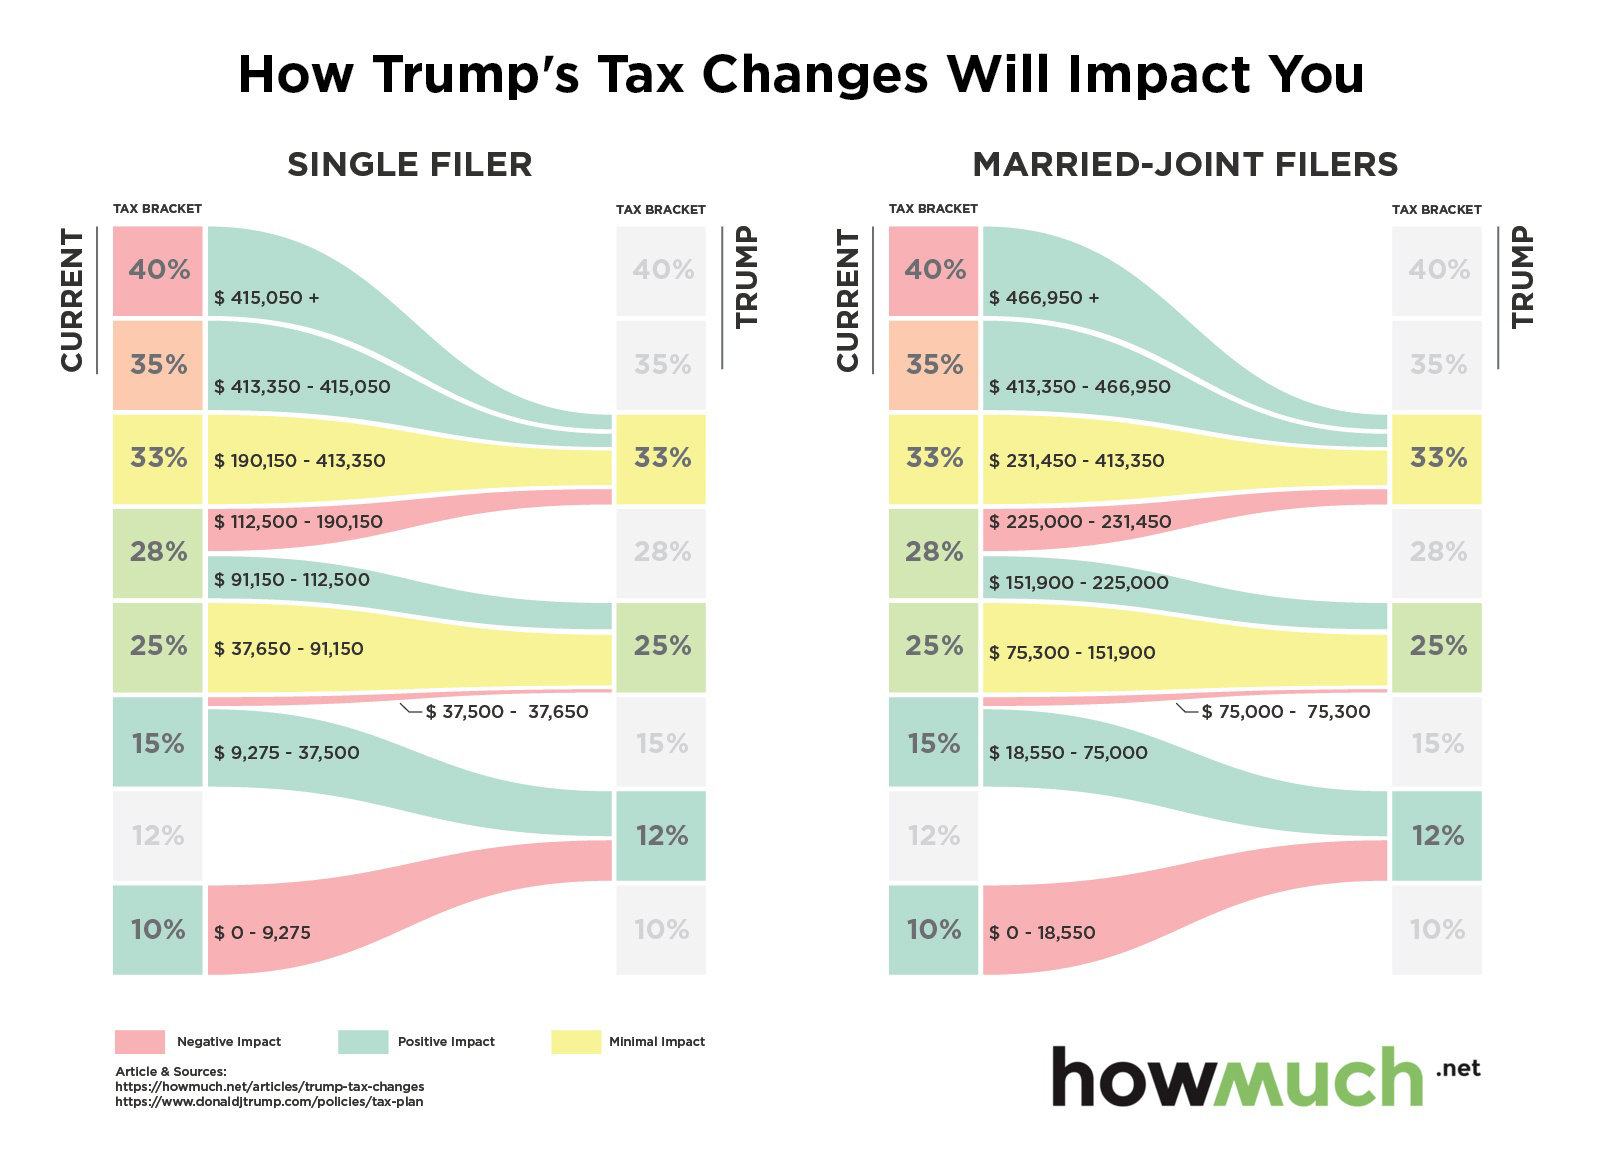 https://www.forbes.com/sites/cameronkeng/2017/01/03/tax-planning-for-trump-the-next-four-years/#6e116c8740a3